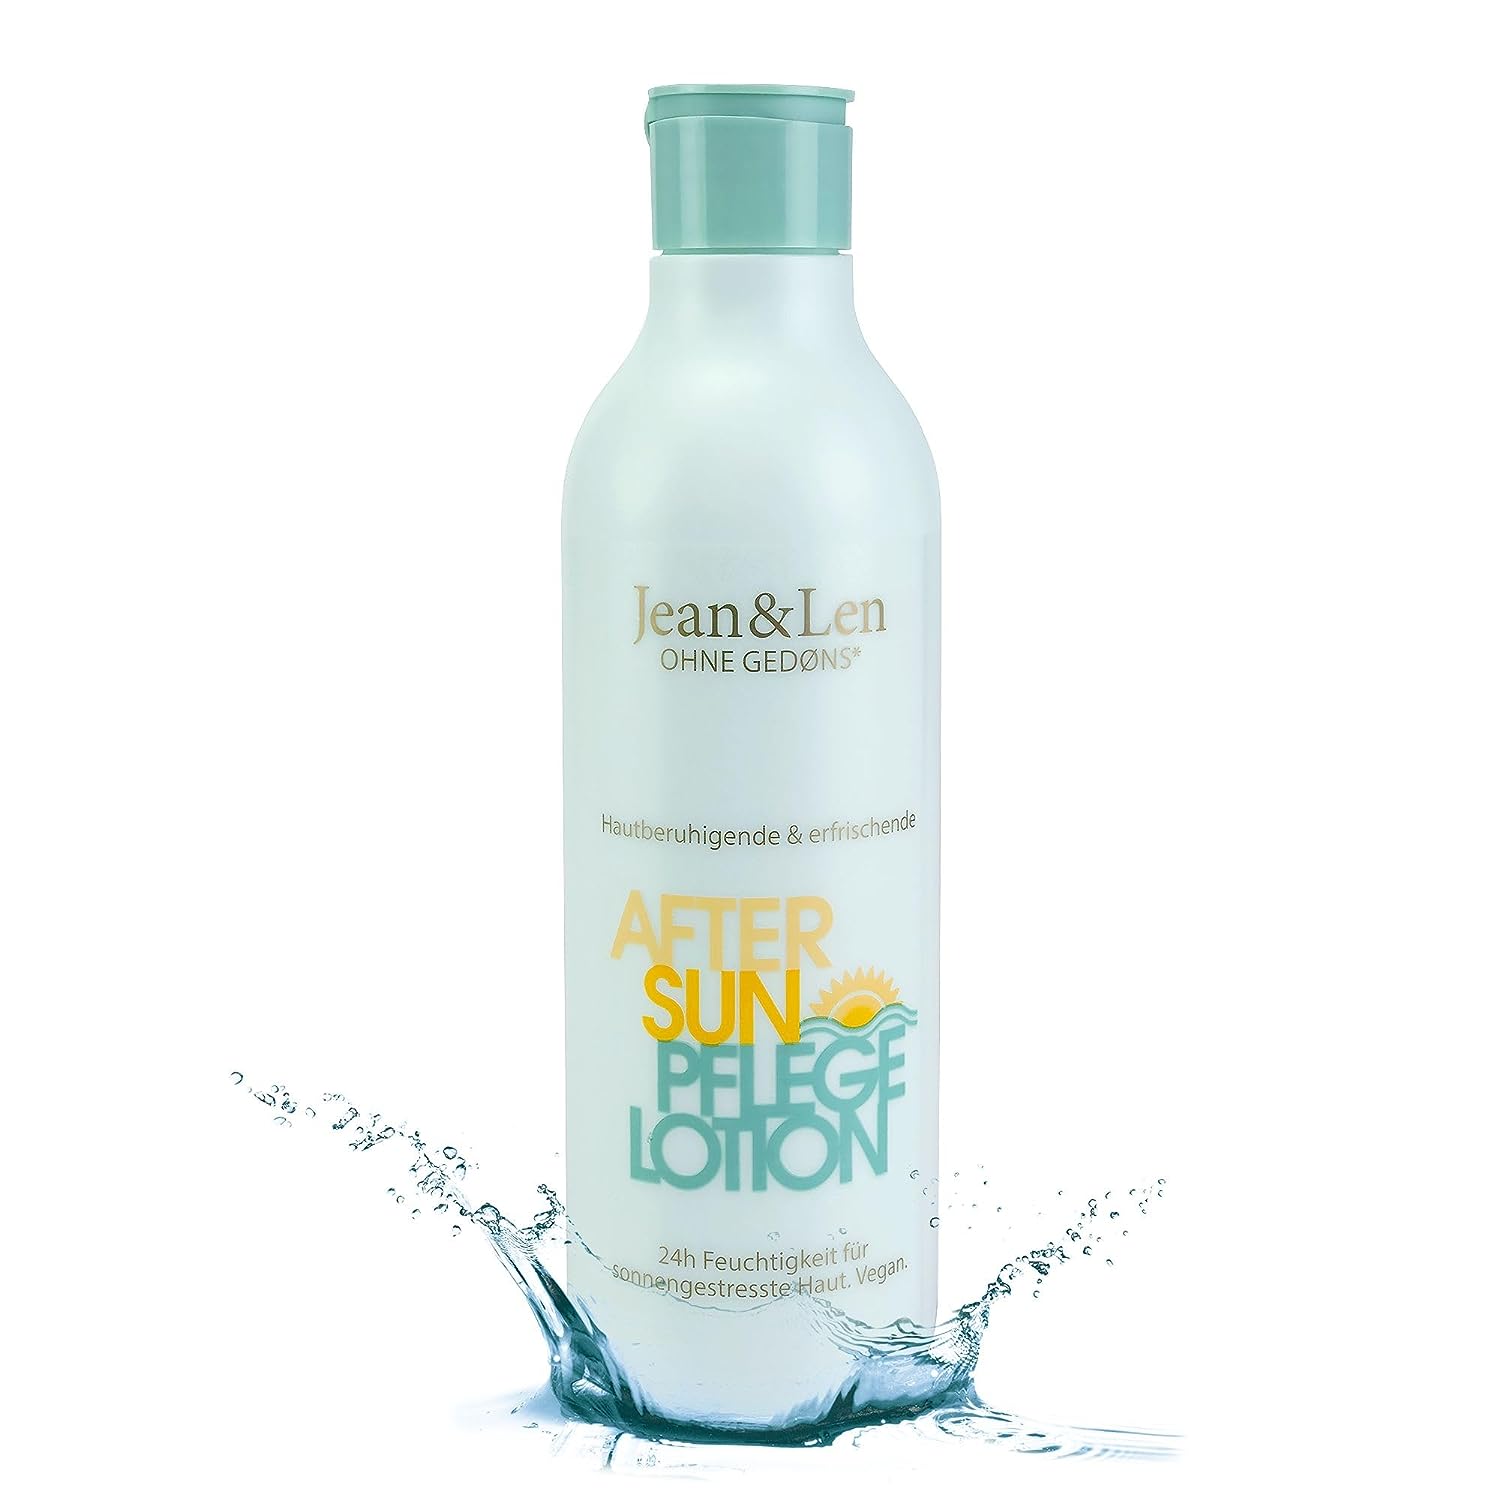 Jean & Len After Sun Care Lotion, Soothing and Refreshing Skin, with Aloe Vera & Vitamin E, up to 24 Hours Moisture for Sun-Stressed Skin, Paraben & Silicone, Après Sun Vegan, 250 ml